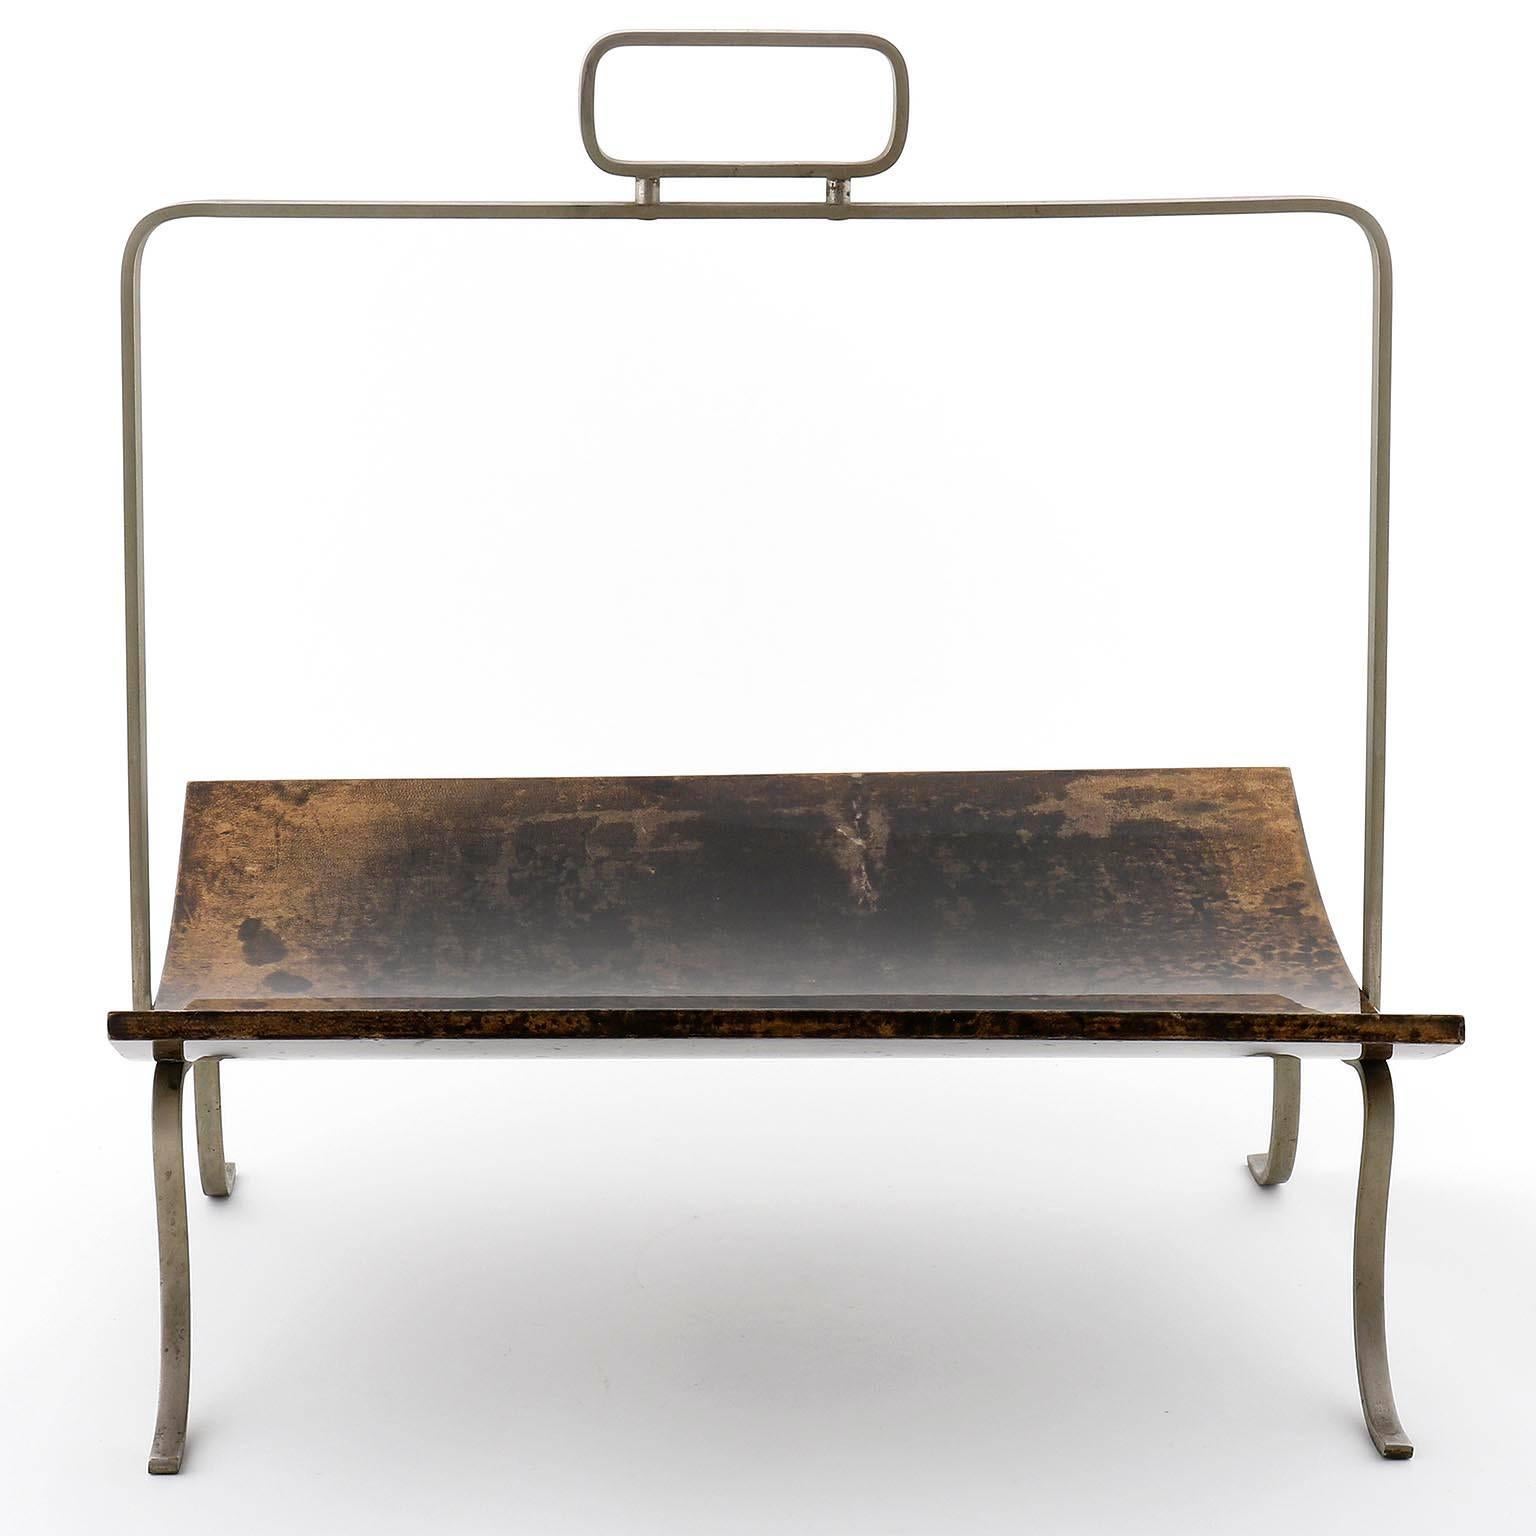 An Italian newspaper stand by Aldo Tura, manufactured in midcentury, circa 1970 (1960s-1970s).
The stand is made of natural aged nickel plated brass with lovely patina.
The shelf is made of bent wood, covered with brown and black goatskin and